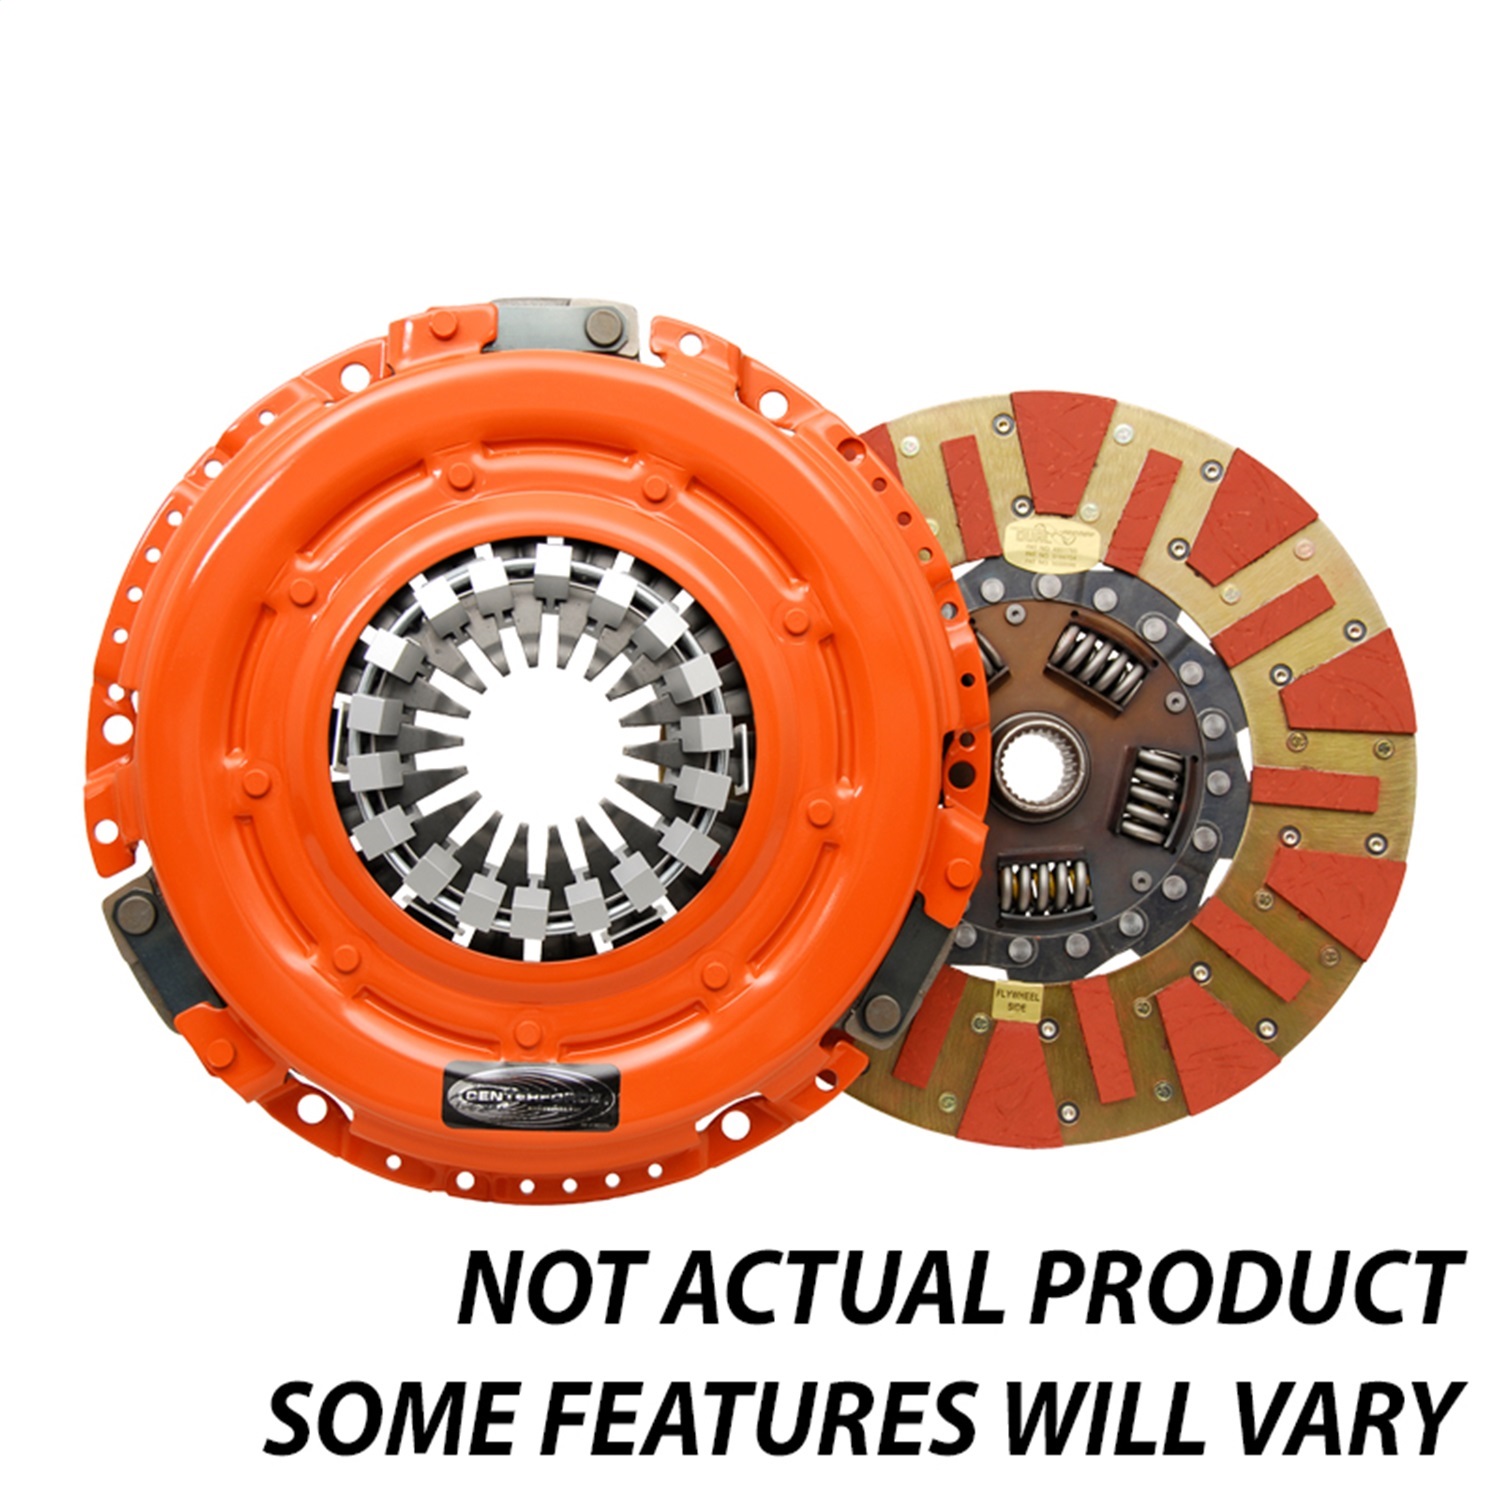 Centerforce Centerforce DF504076 Dual Friction Clutch Pressure Plate And Disc Set